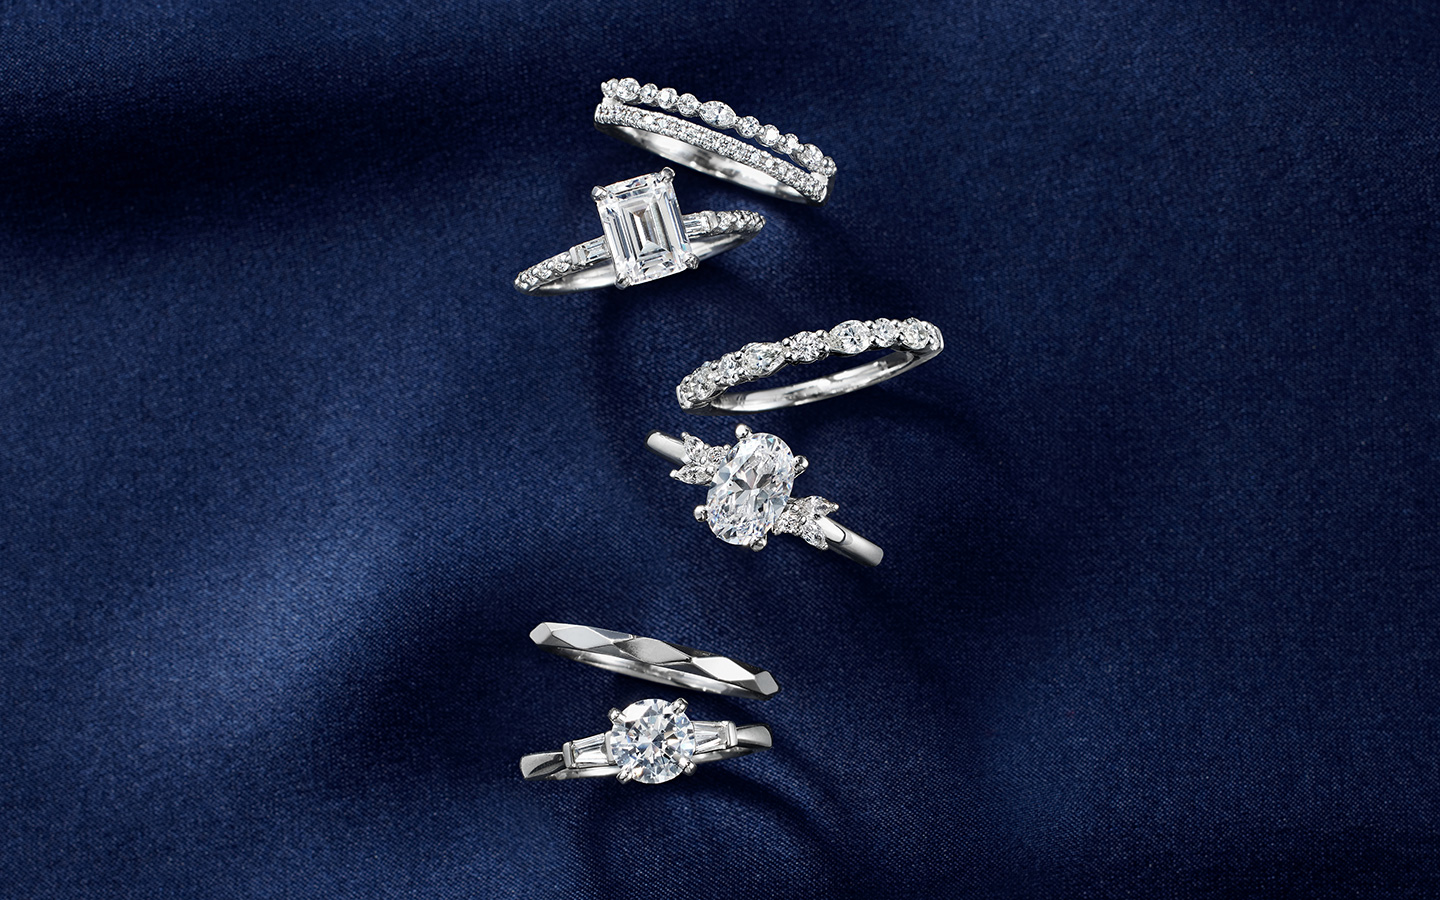 Diamond, white gold and platinum engagement rings and wedding bands.